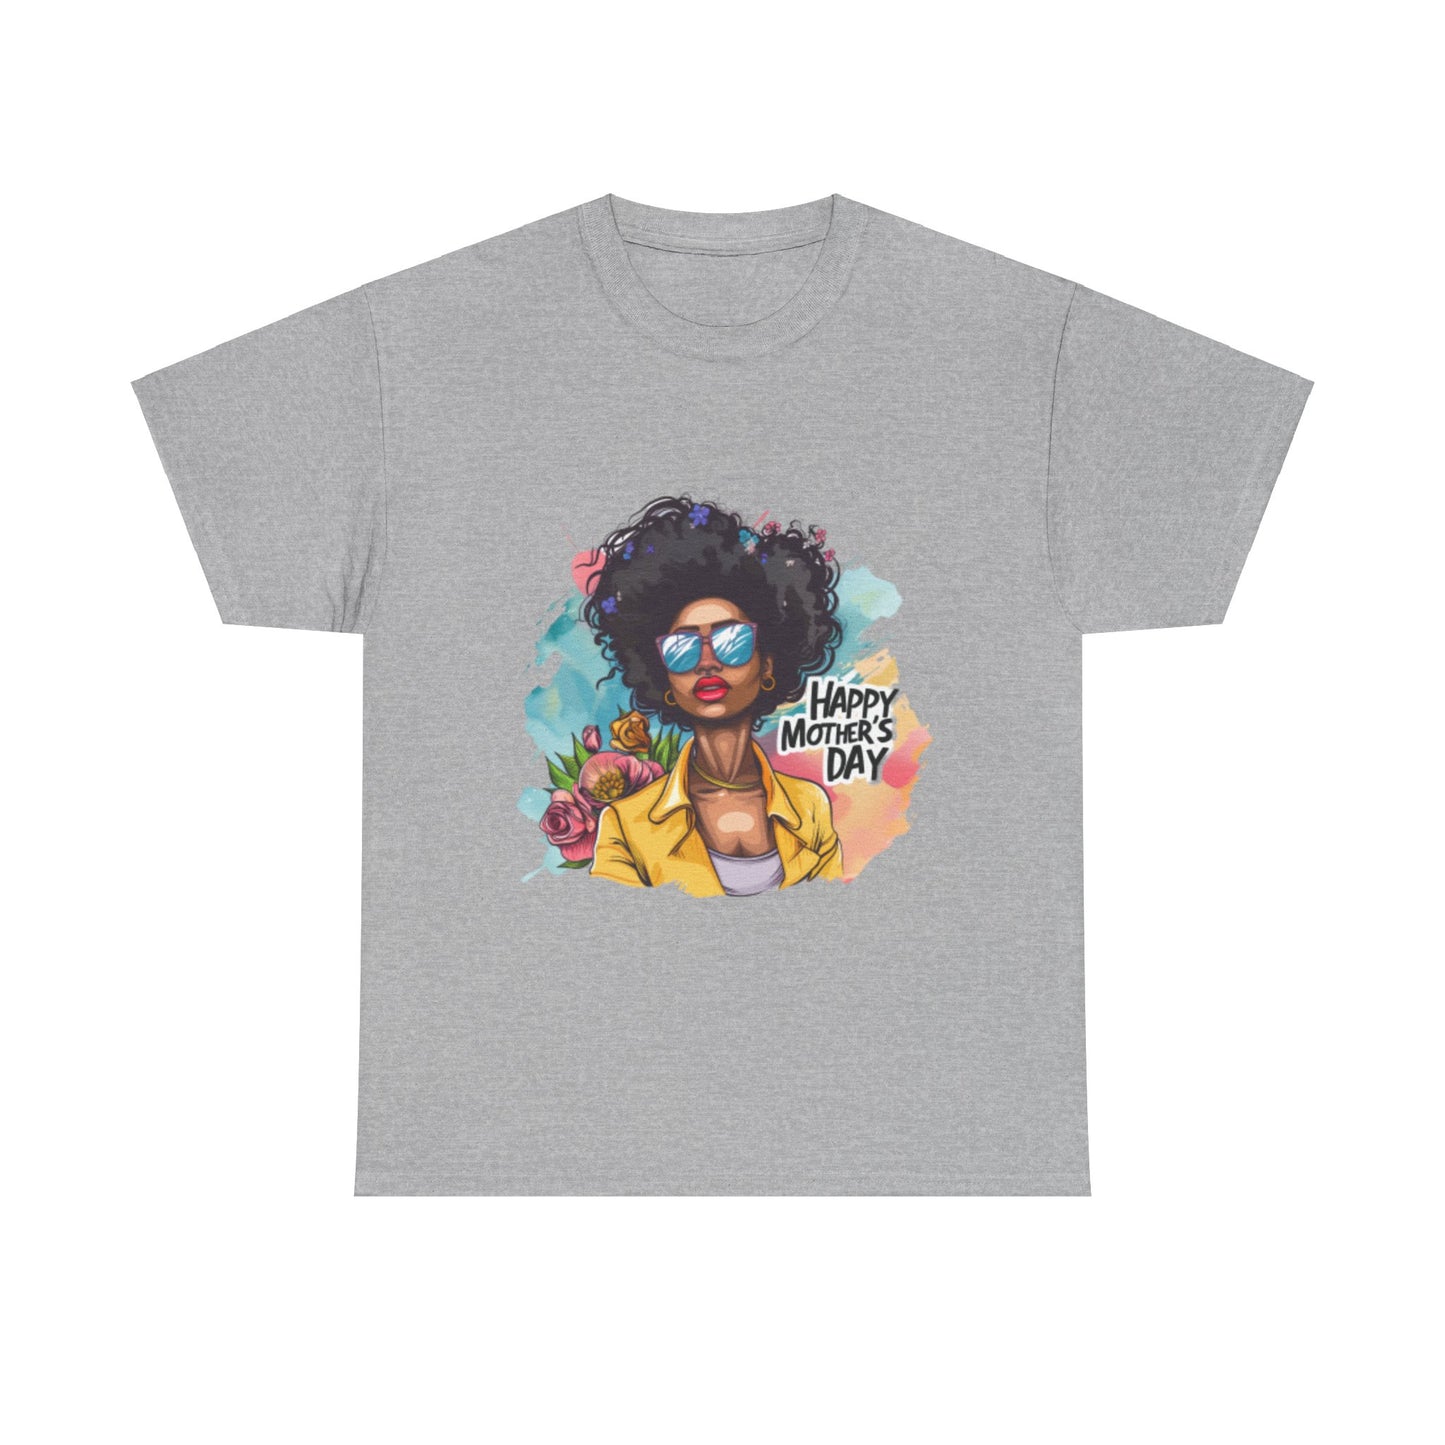 Happy Mother's Day African American Mom Graphic Unisex Heavy Cotton Tee Cotton Funny Humorous Graphic Soft Premium Unisex Men Women Sport Grey T-shirt Birthday Gift-9